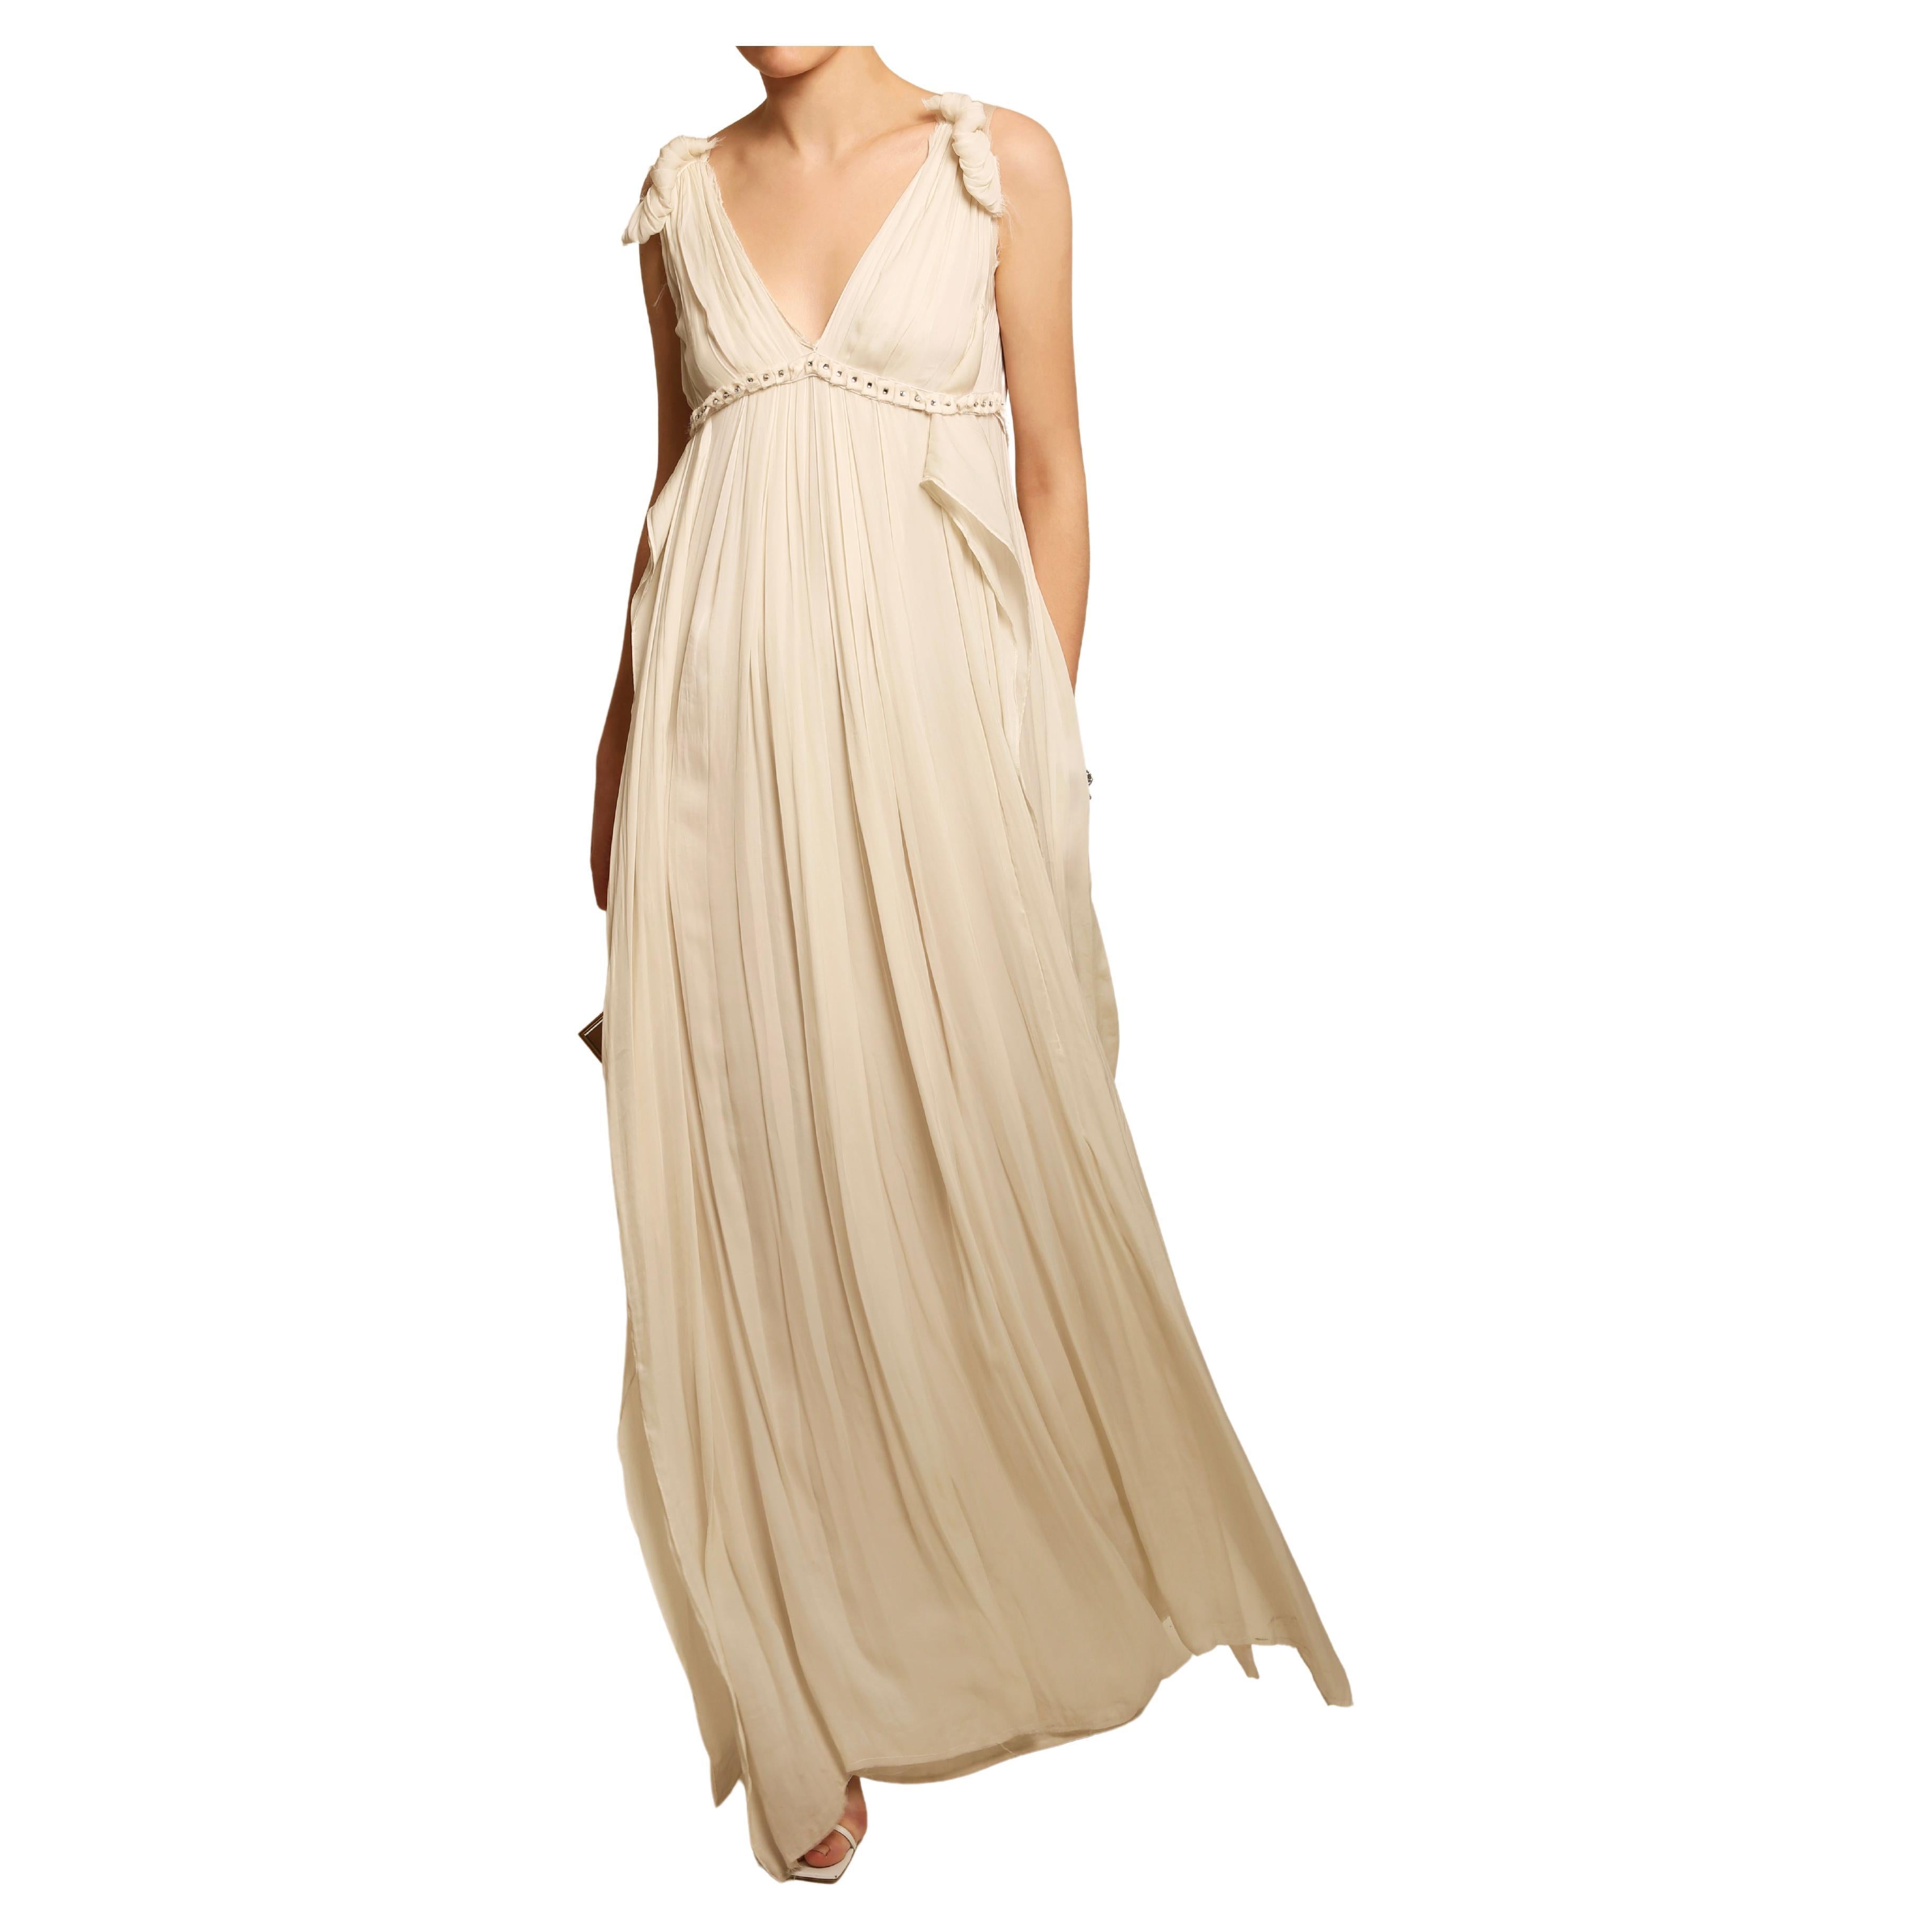 Lanvin white grecian style washed silk crystal embellished wedding dress gown